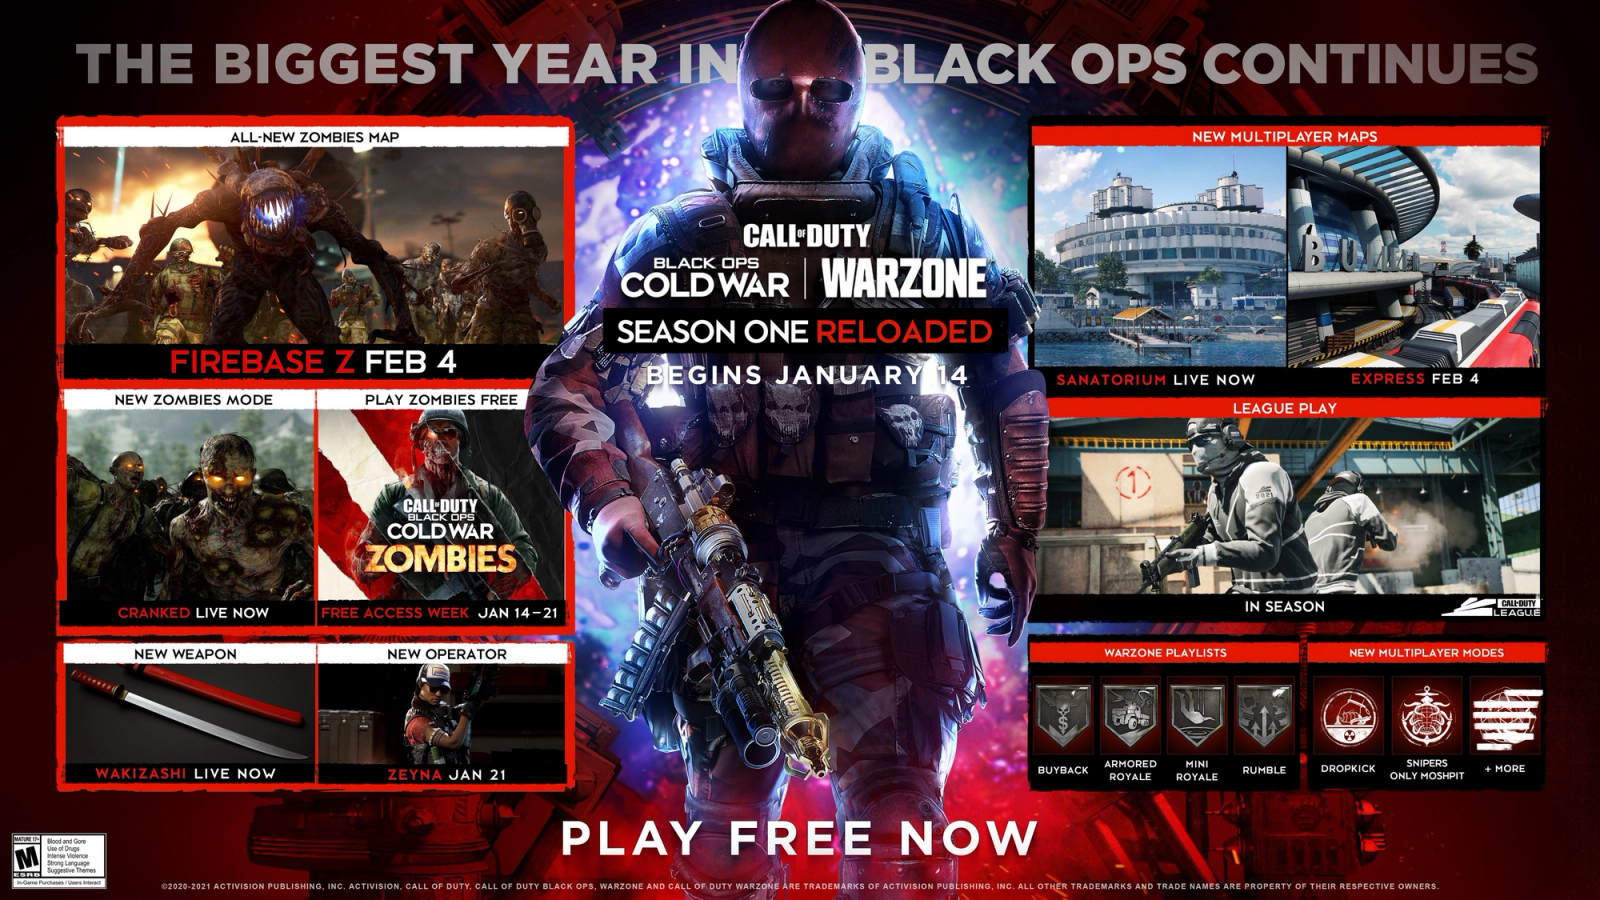 Call of Duty Black Ops Cold War Warzone Season One Reloaded Maps Release Date Patch notes Midseason Update